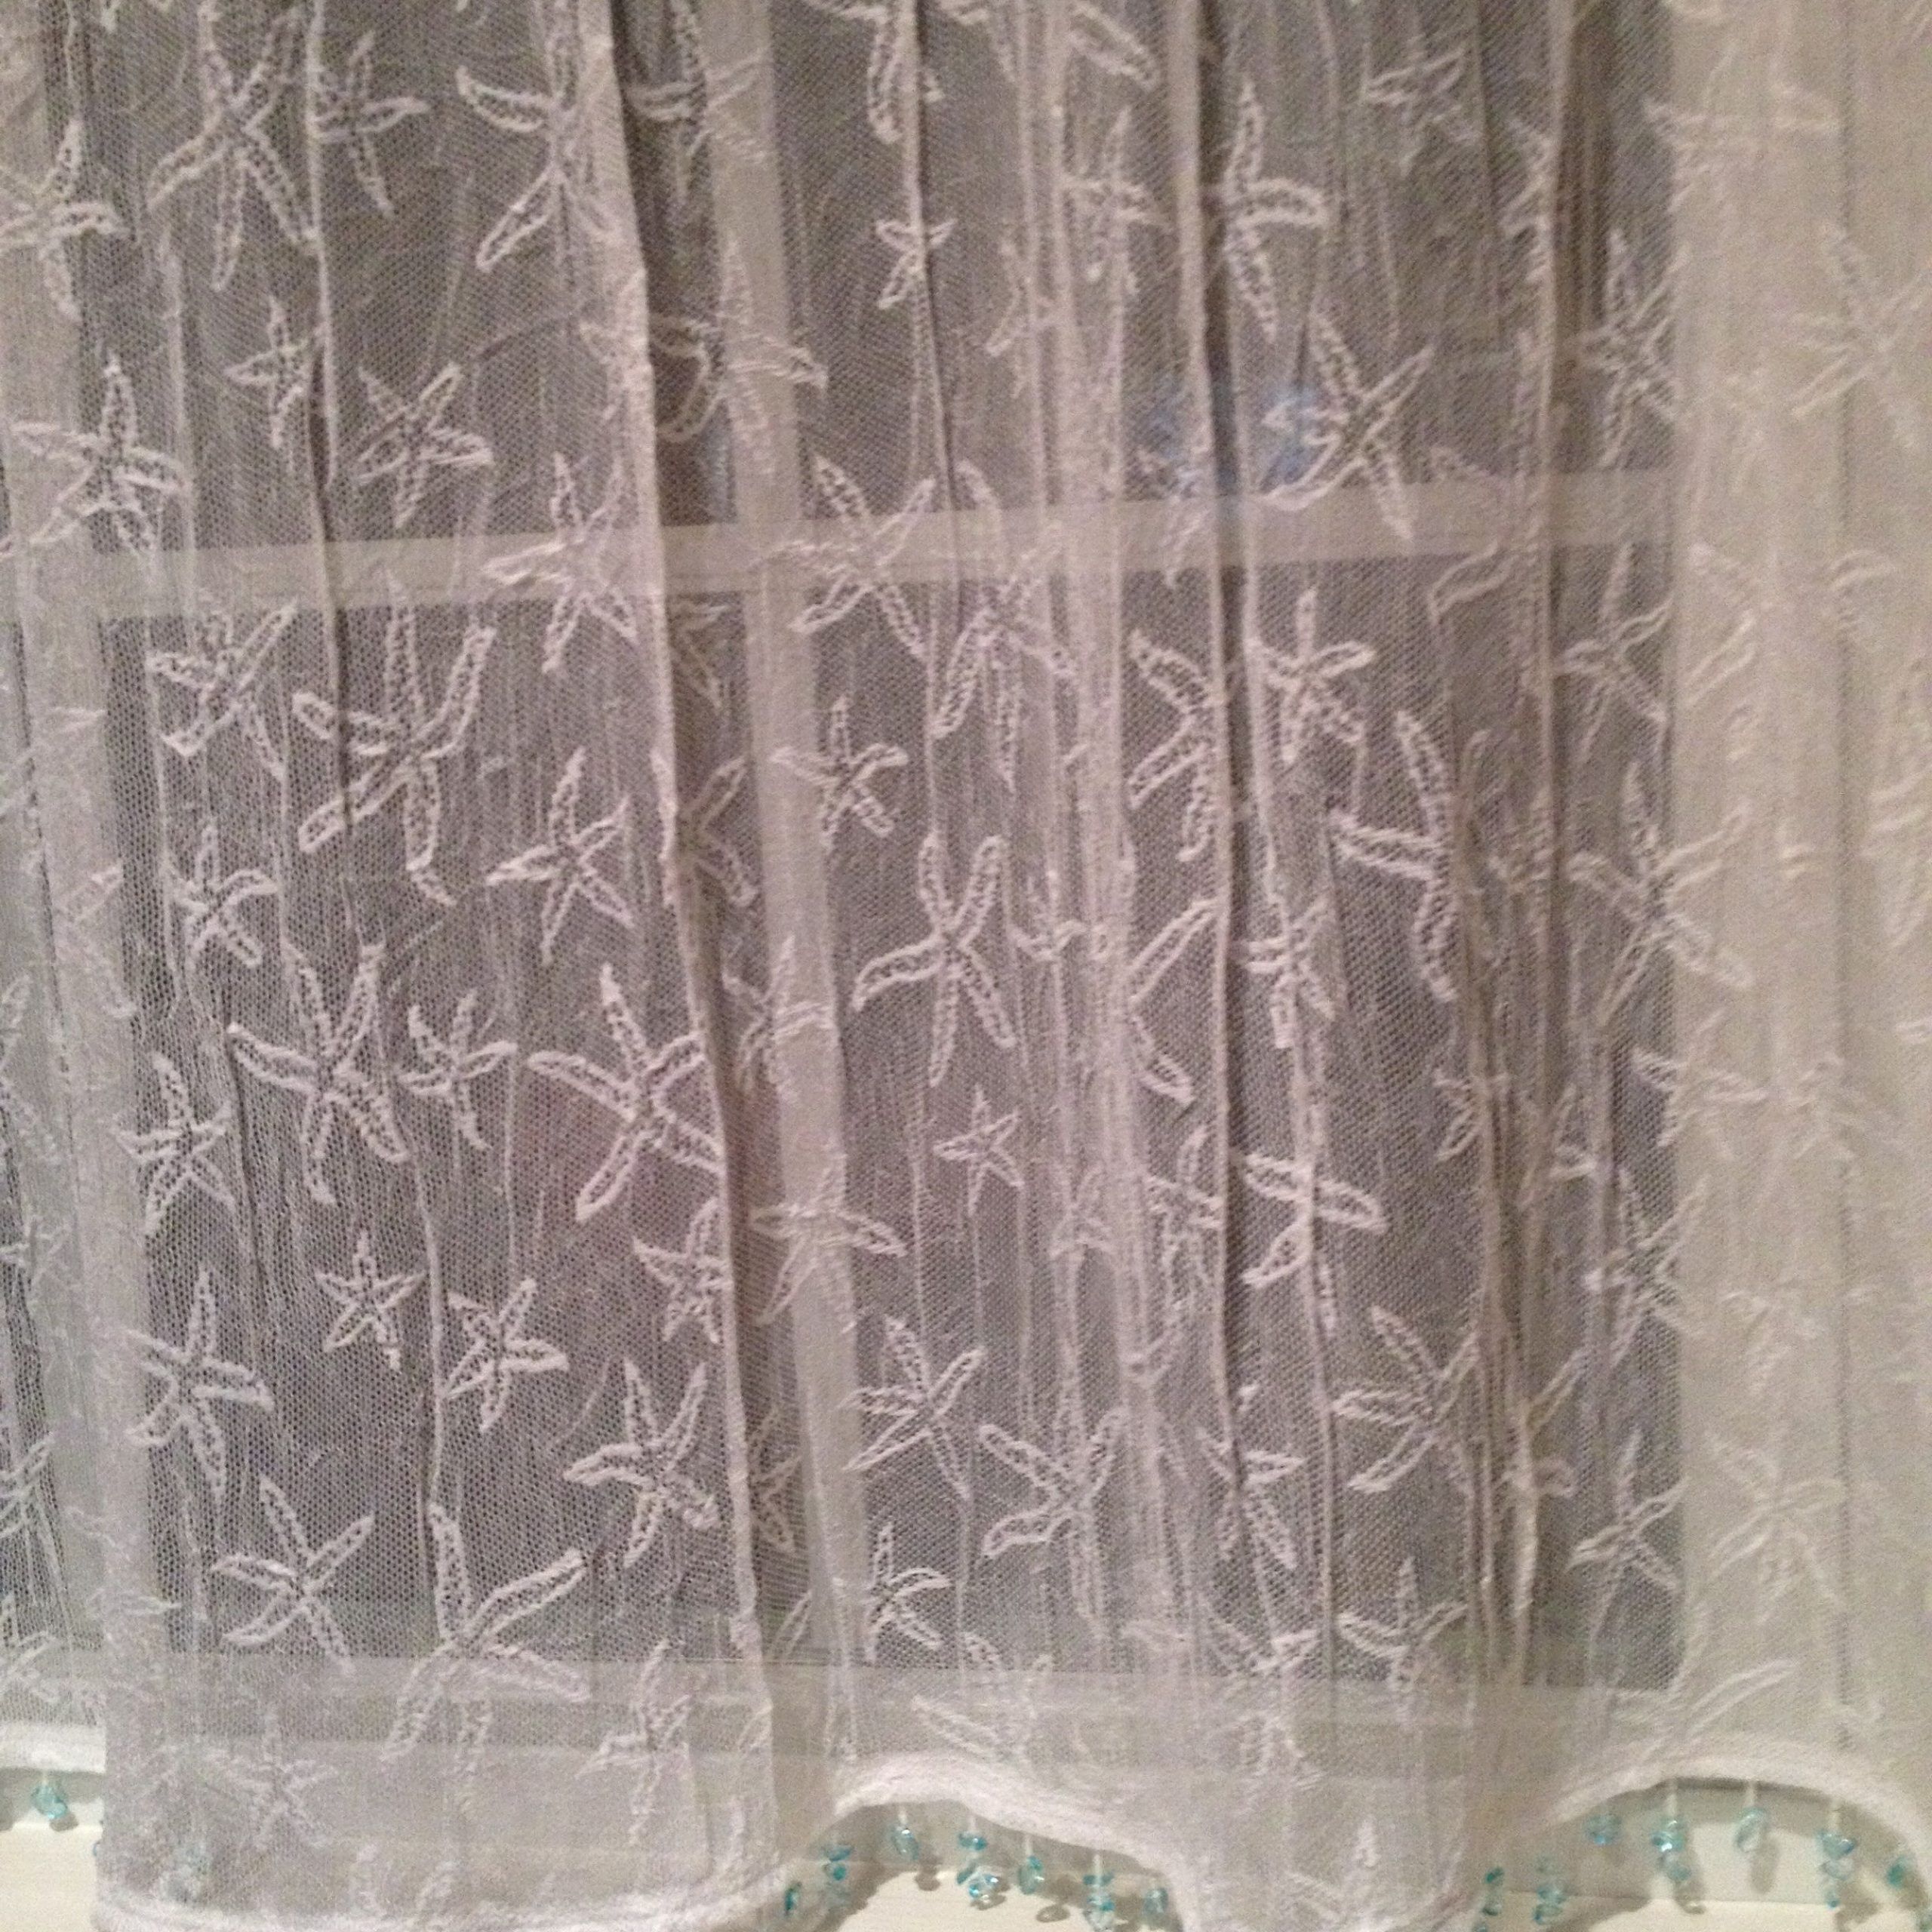 Most Recently Released Coastal Starfish Curtains  Sheer With Aqua Sea Glass Bead With Regard To Marine Life Motif Knitted Lace Window Curtain Pieces (View 9 of 20)